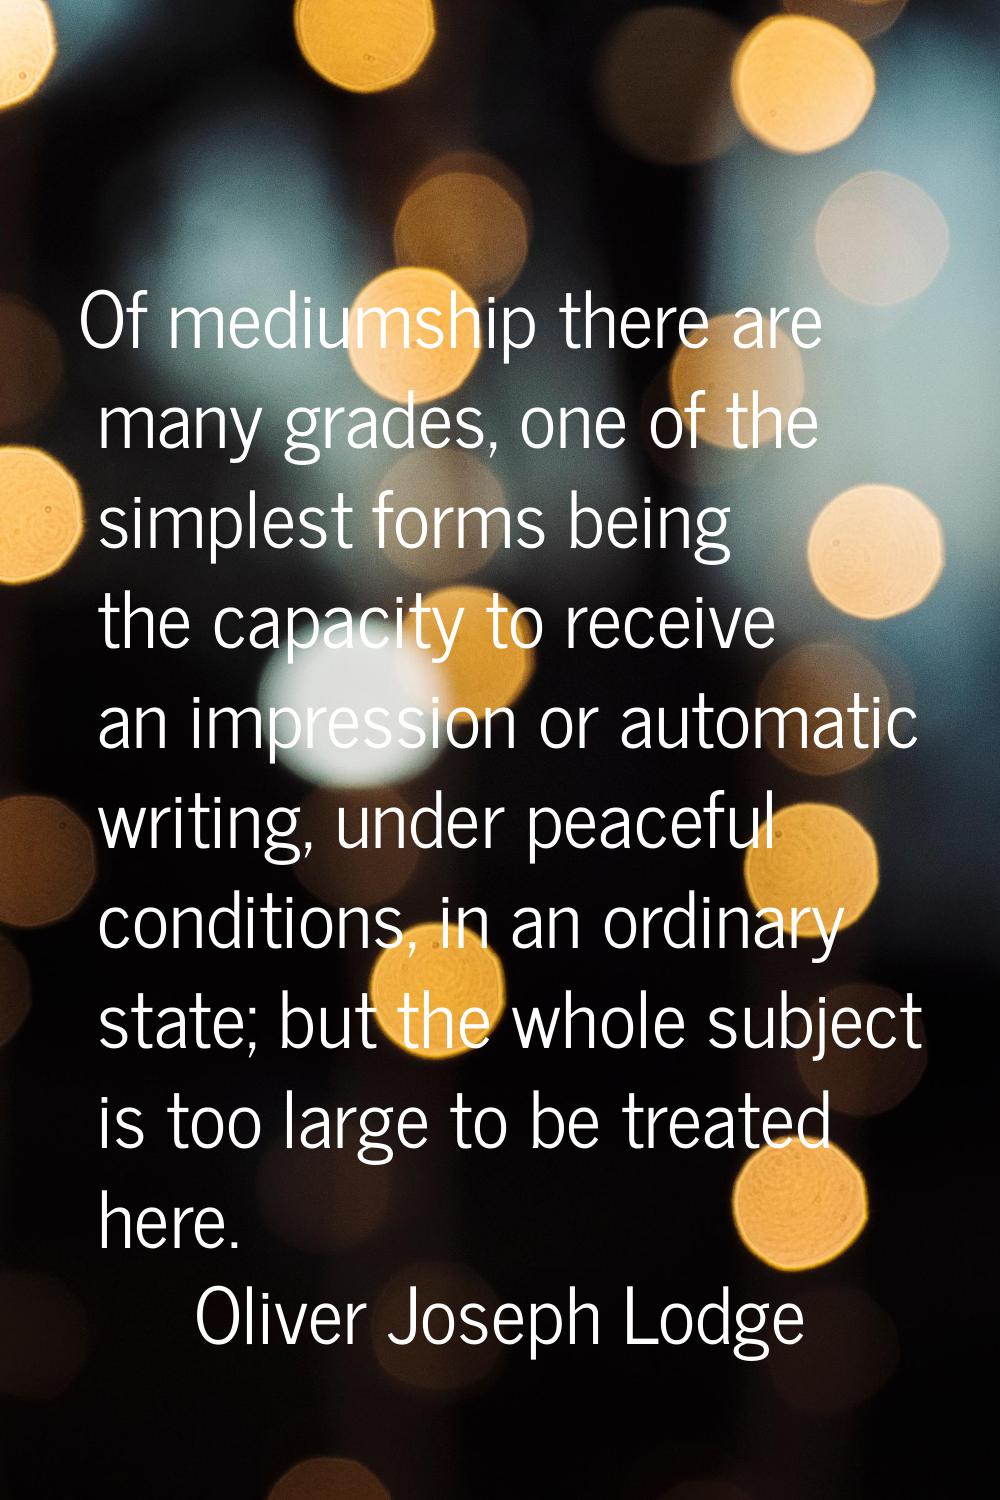 Of mediumship there are many grades, one of the simplest forms being the capacity to receive an imp